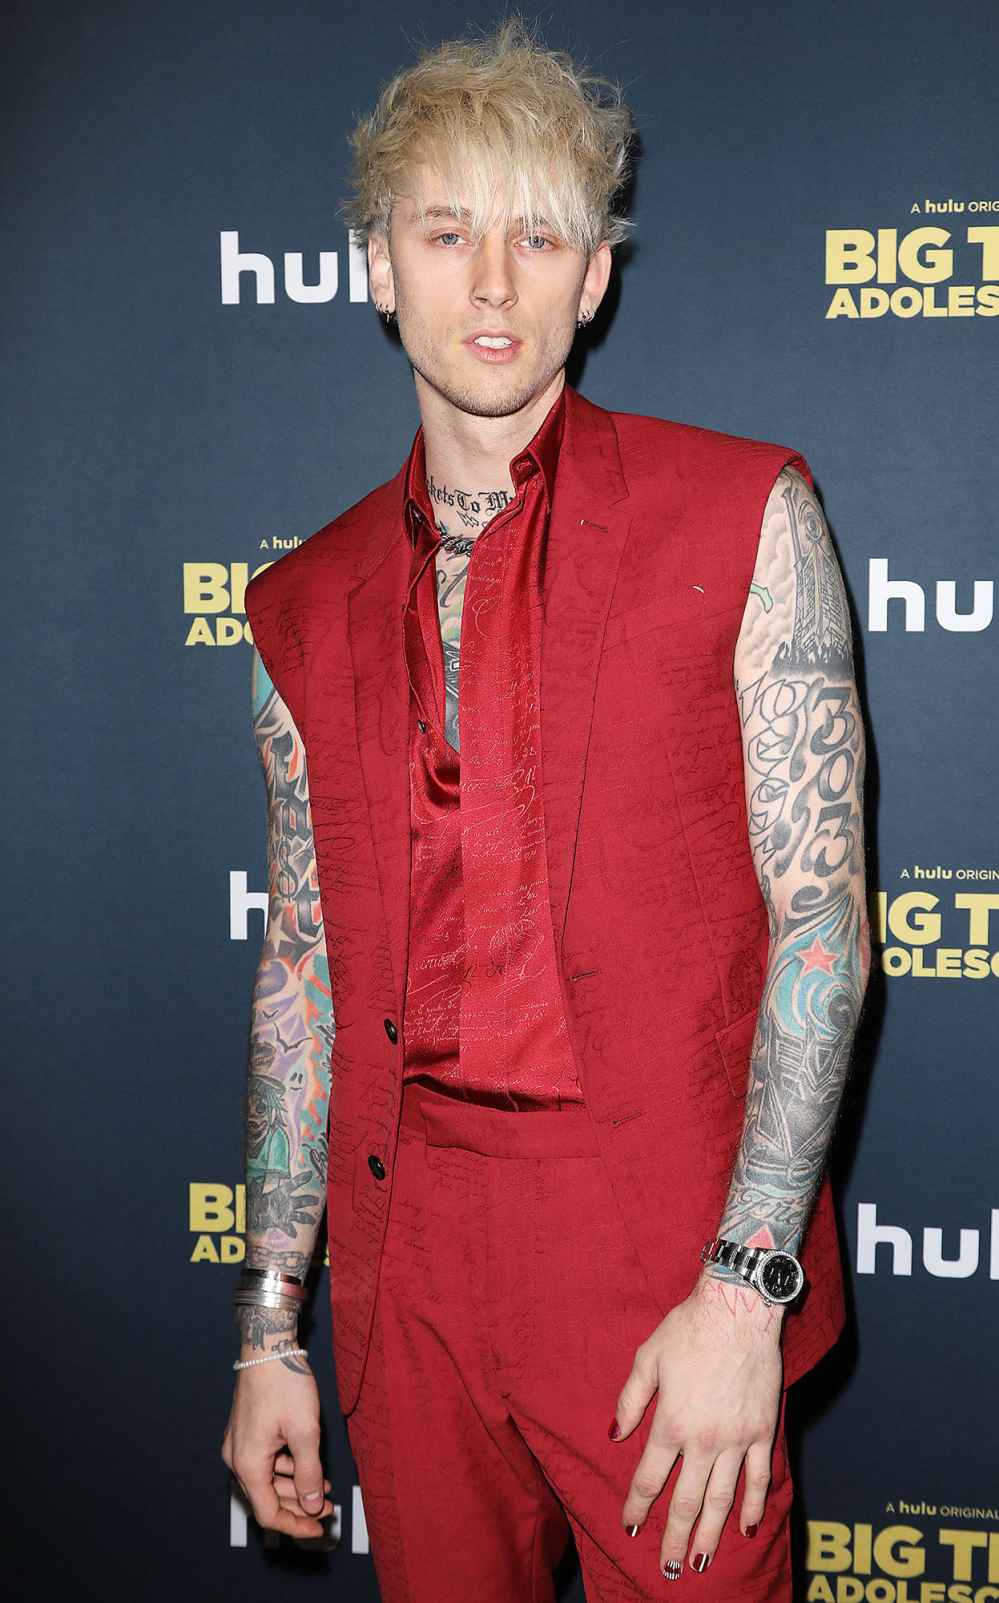 MGK Changes Album Name After Getting Born With Horns Tattoo